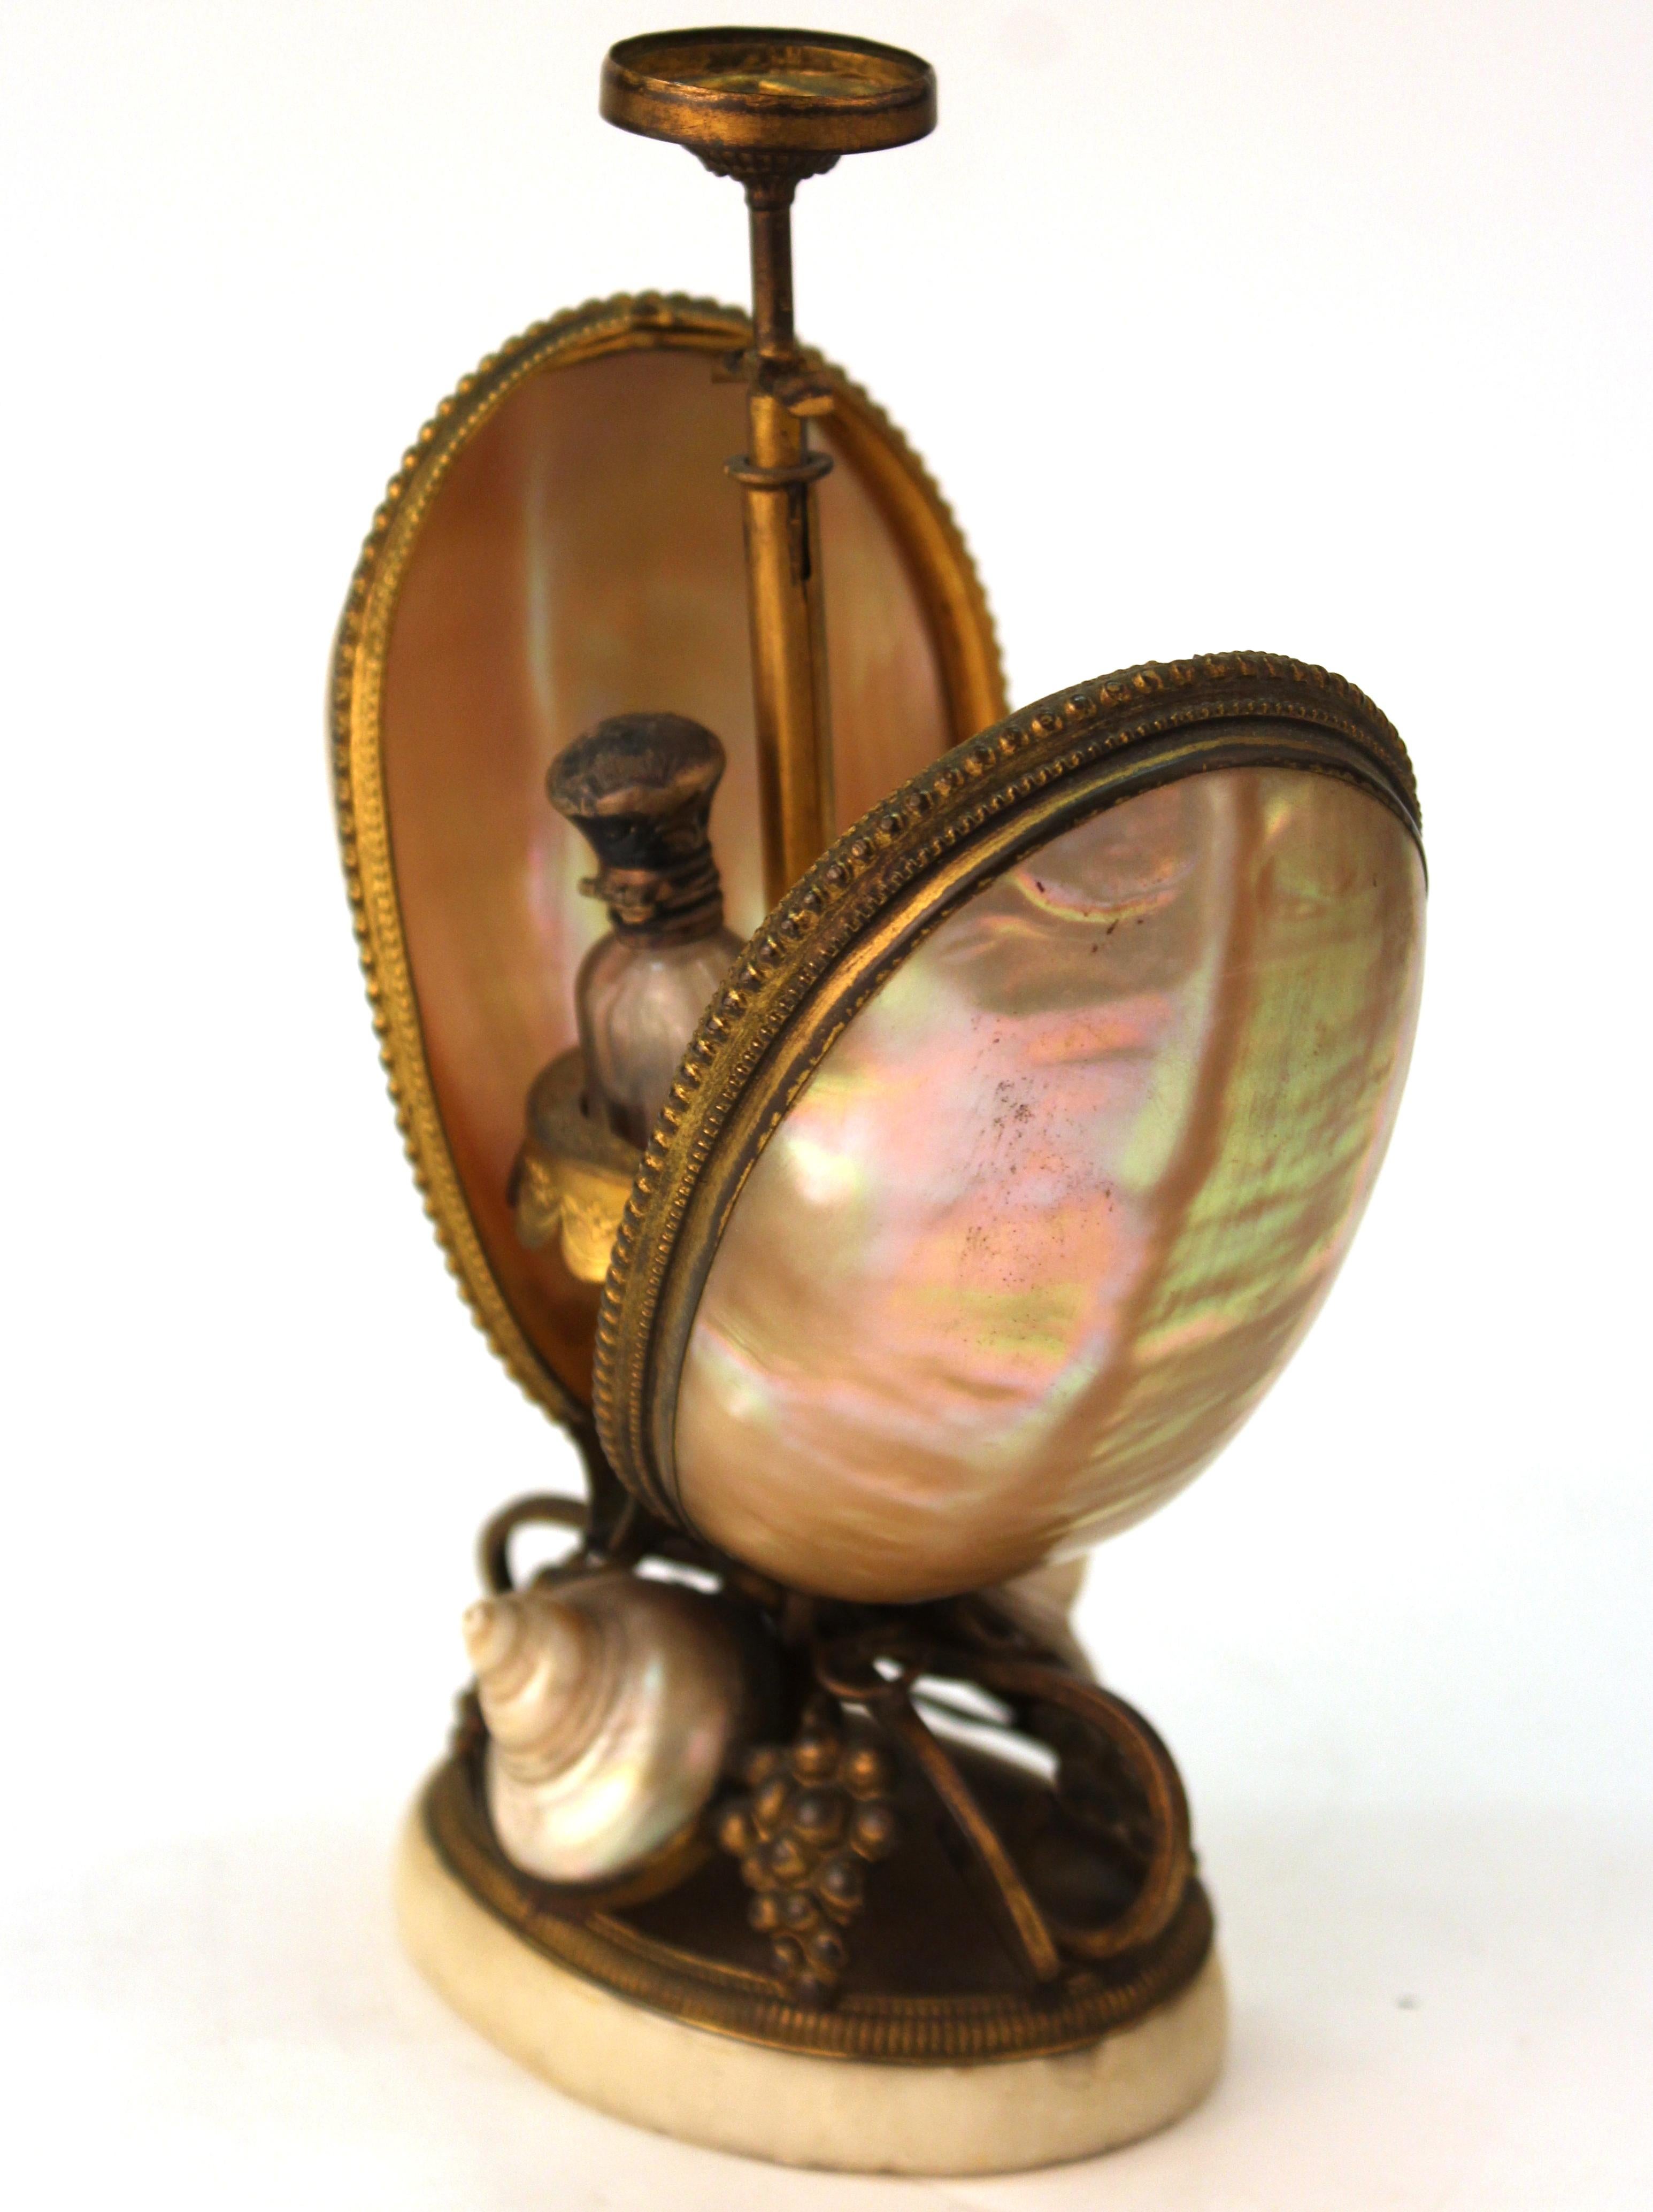 Neoclassical Revival French Nautilus Shell and Ormolu Gilt Metal Mounted Egg-Shaped Mechanical Holder